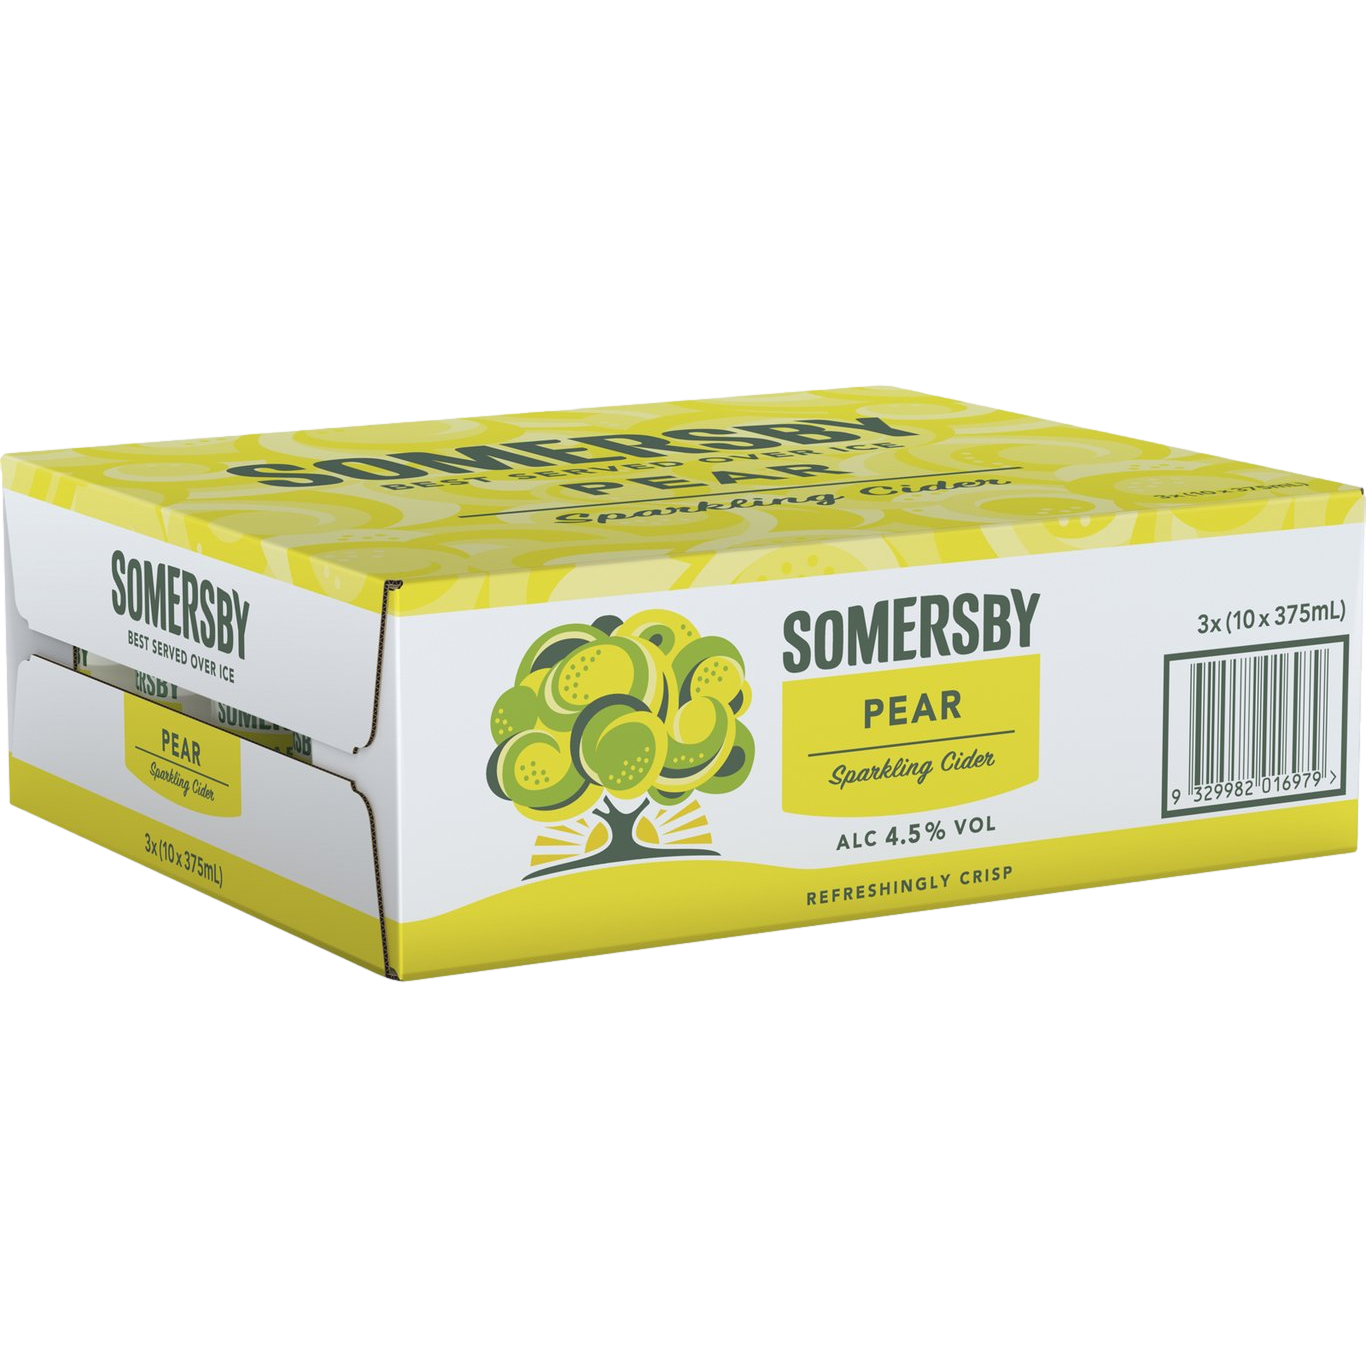 Somersby Pear Cider 375ml Can Case of 30